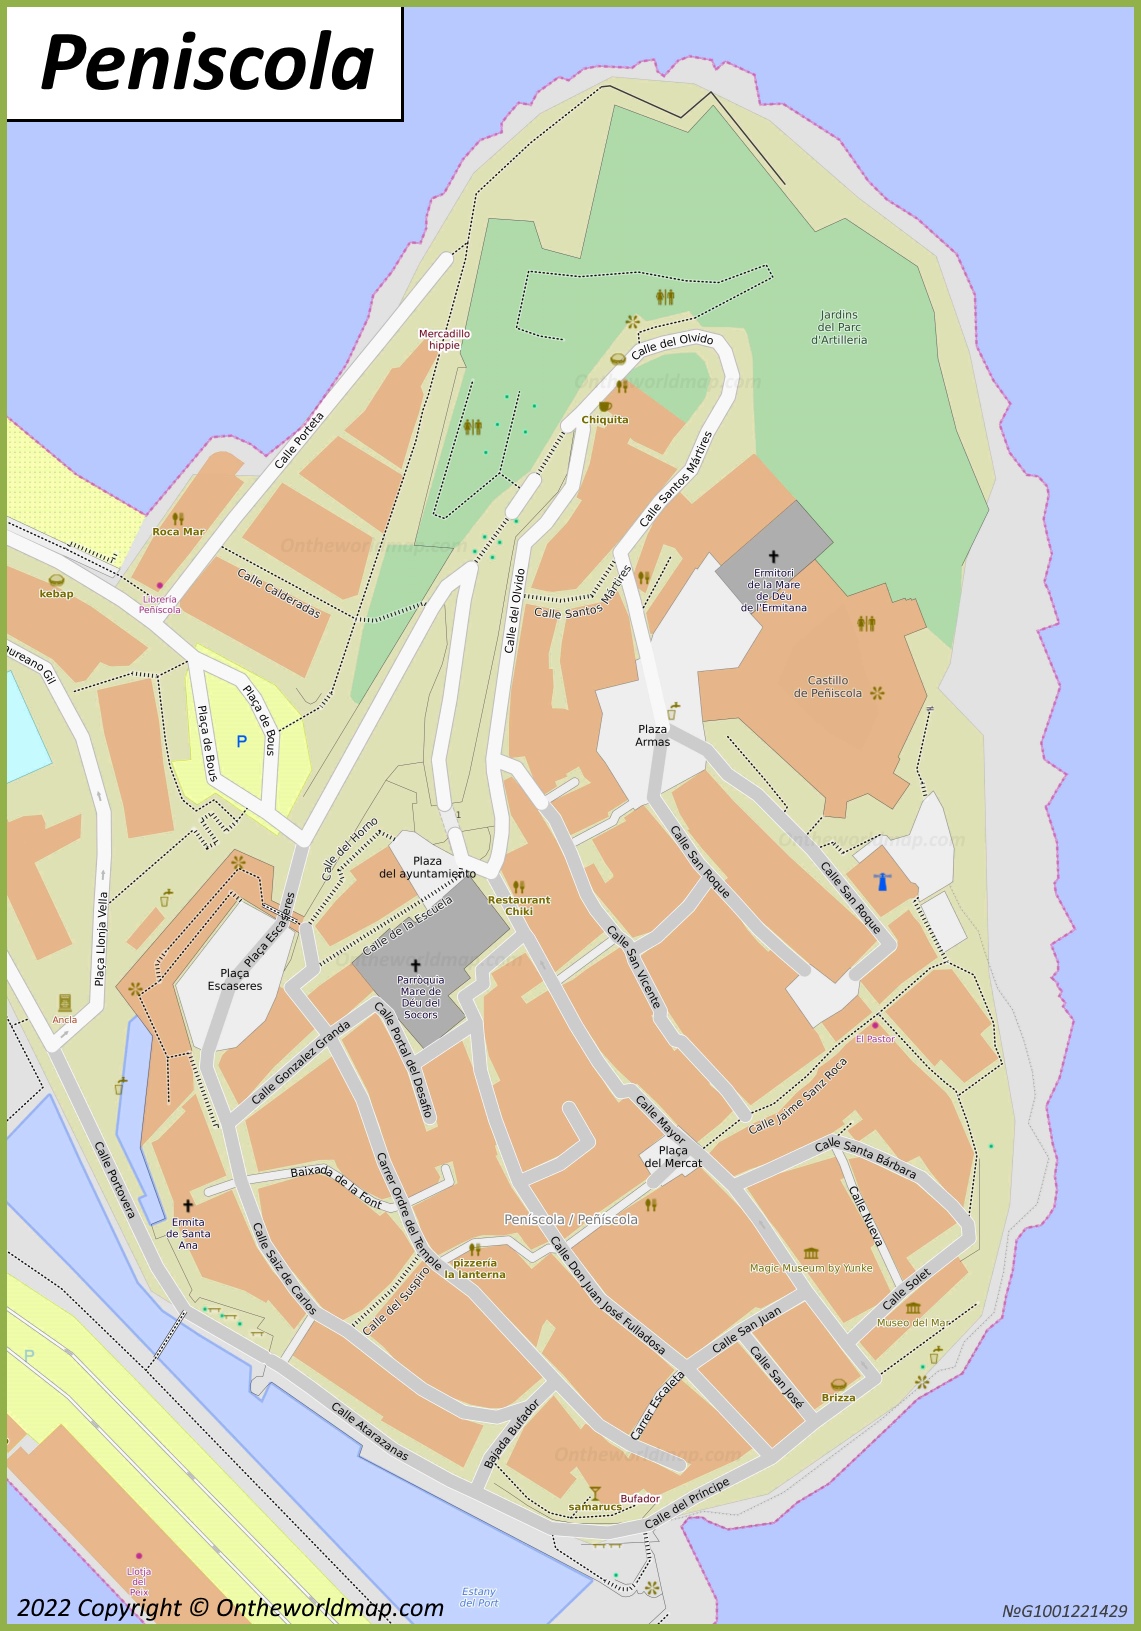 Peniscola Old Town Map